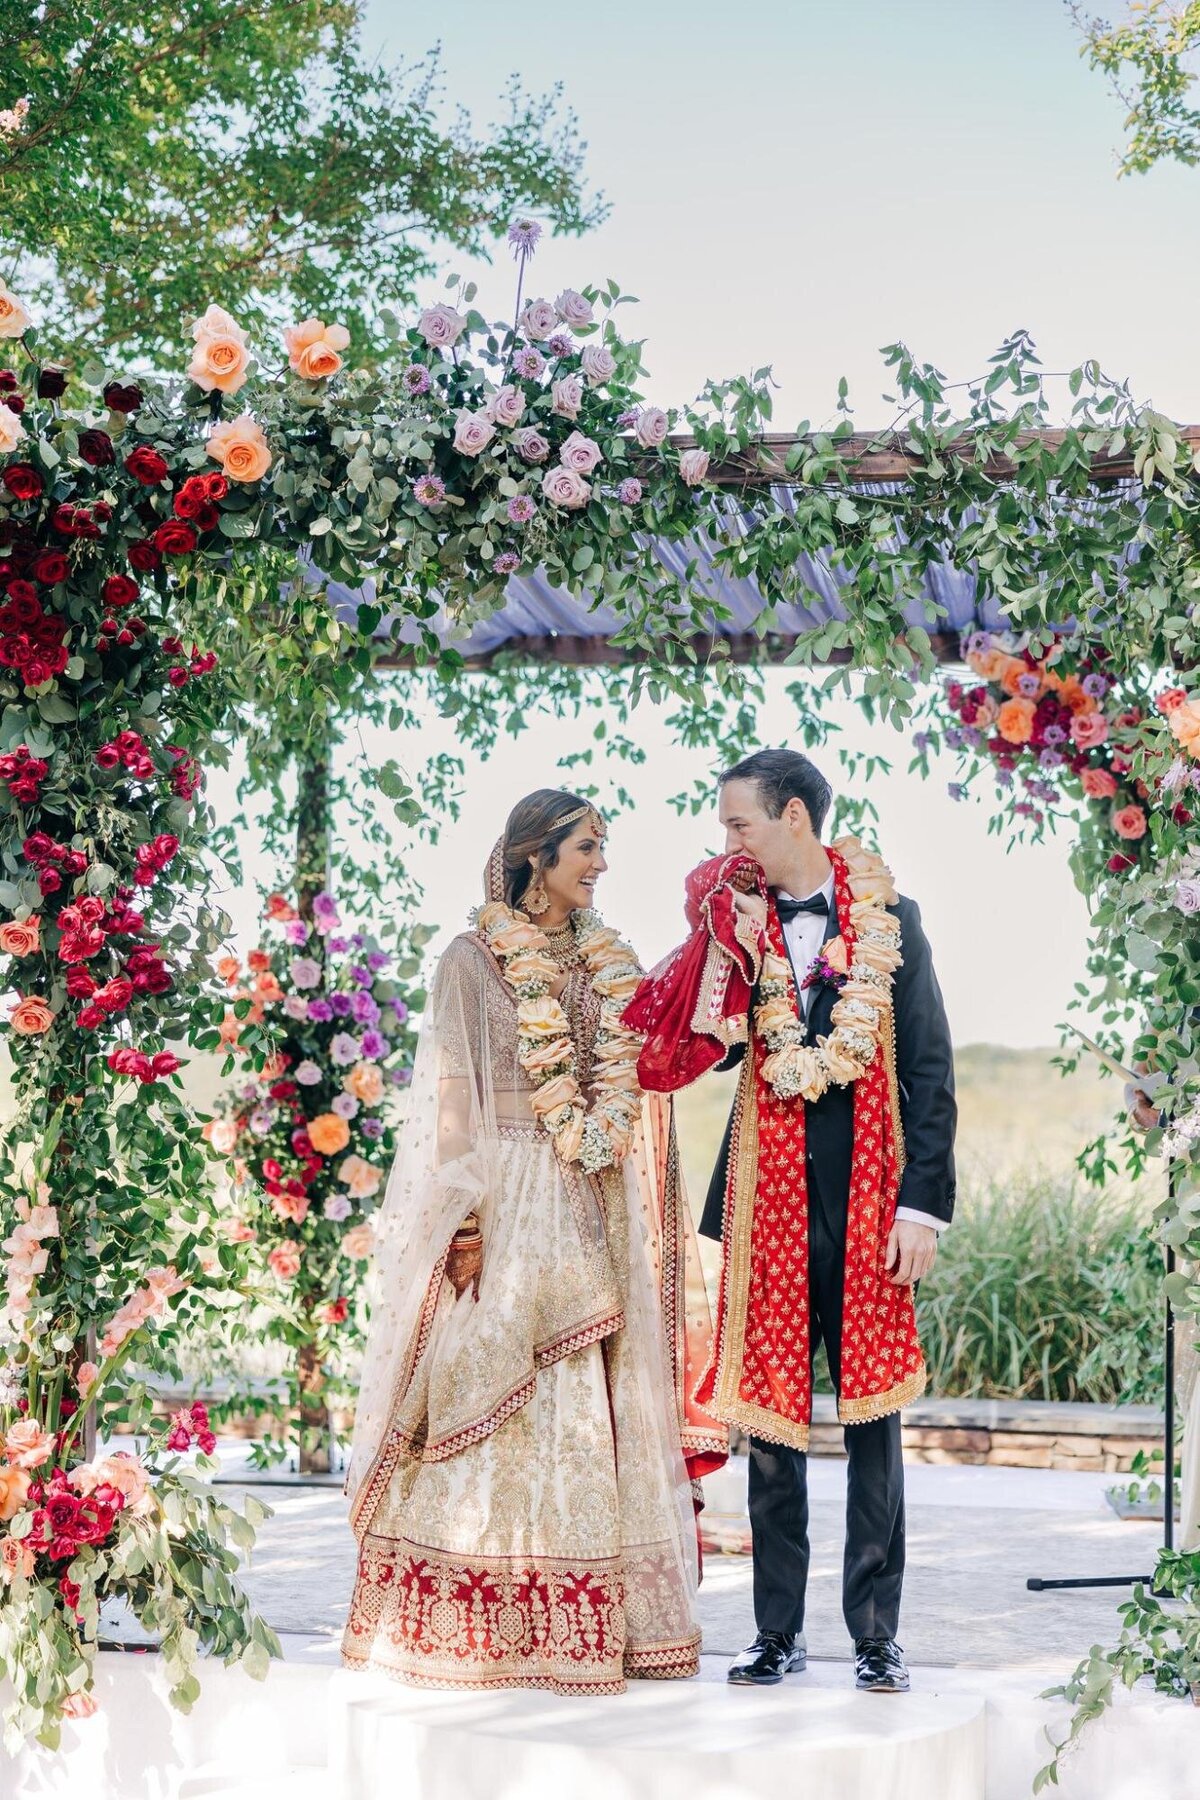 A bride and groom in traditional indian wedding attire exchange smiles under a floral archway outdoors.